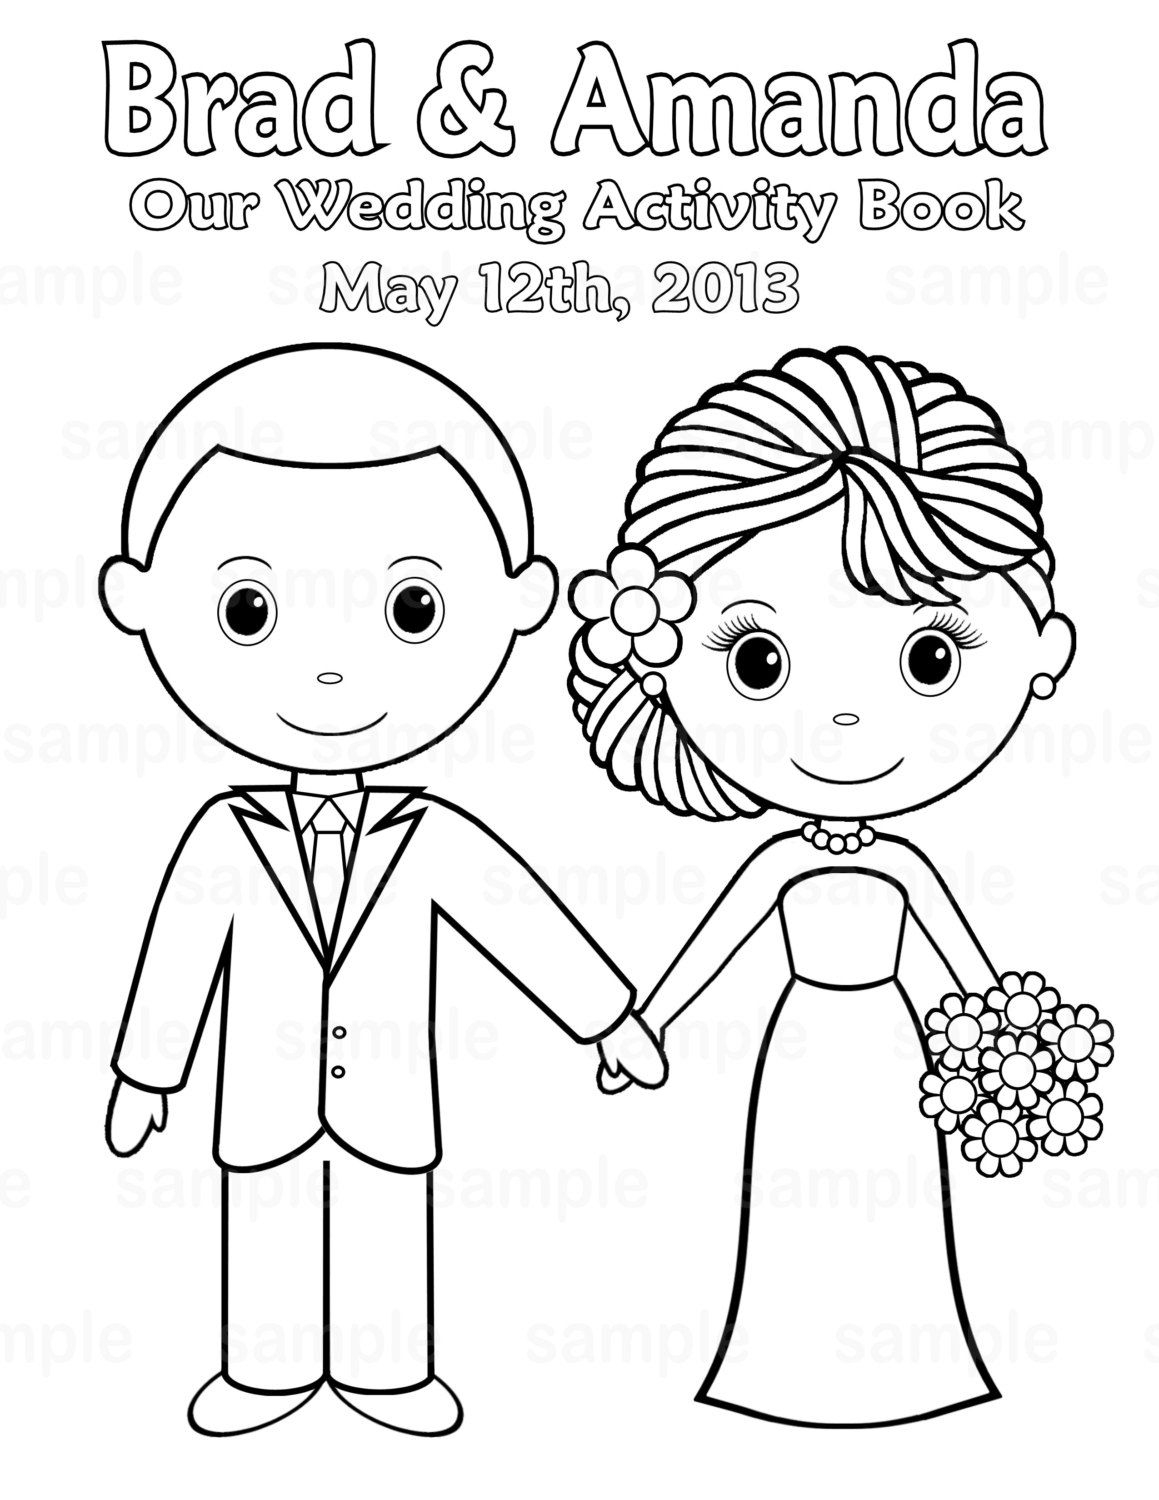 Printable Personalized Wedding Coloring Activity Book Favor Kids 8.5 - Wedding Coloring Book Free Printable